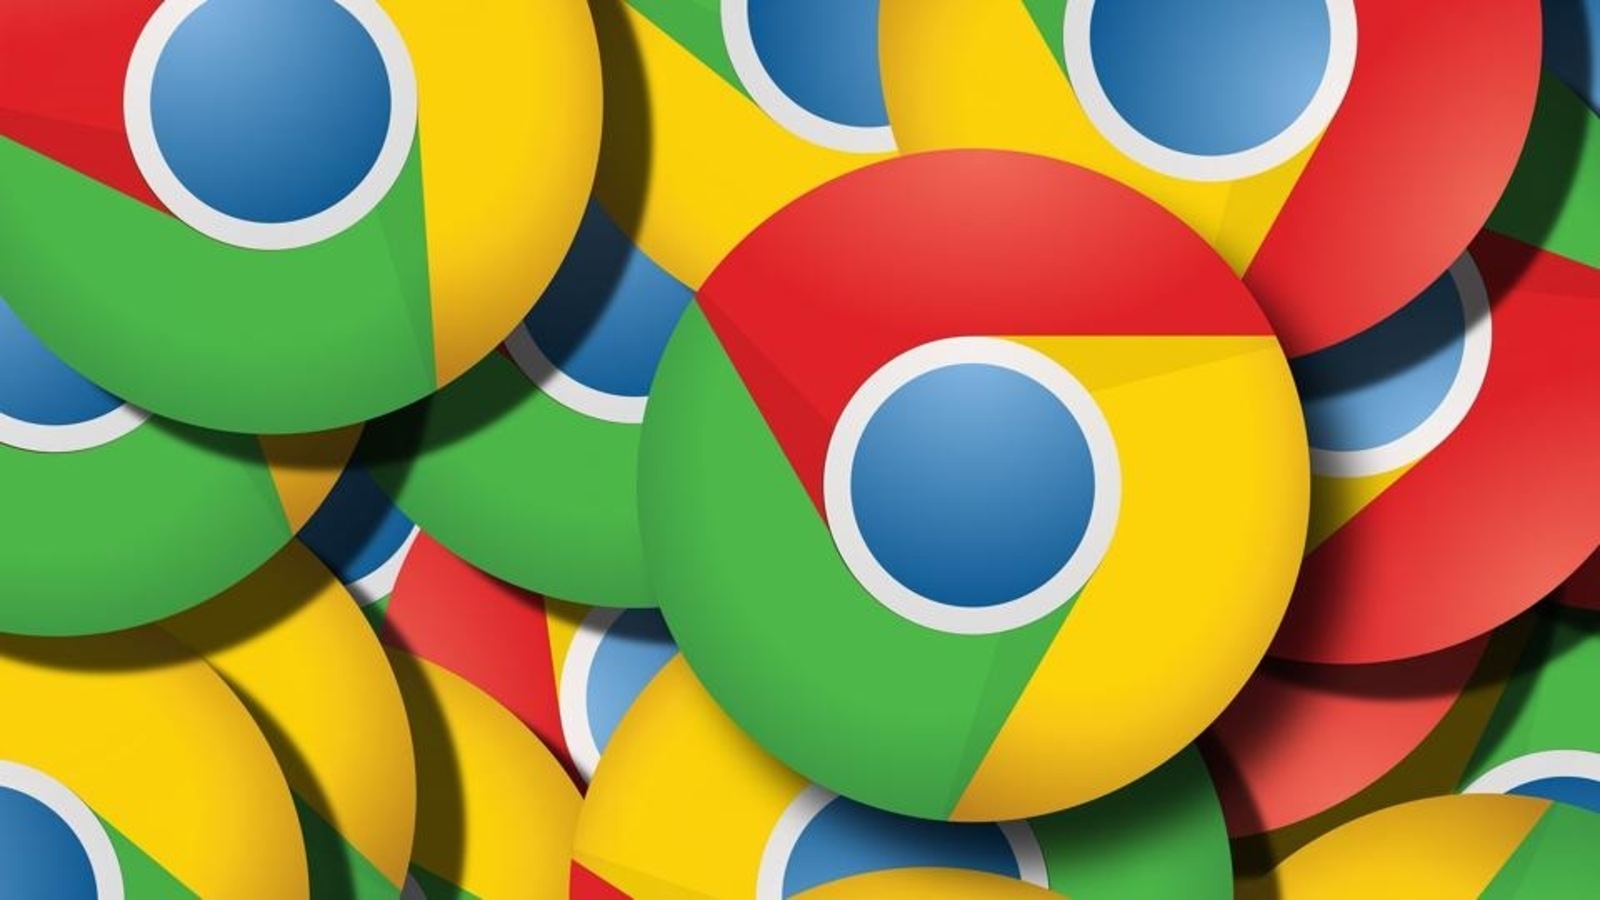 Cyber security firm claims data of 2.5 billion Google Chrome users at risk